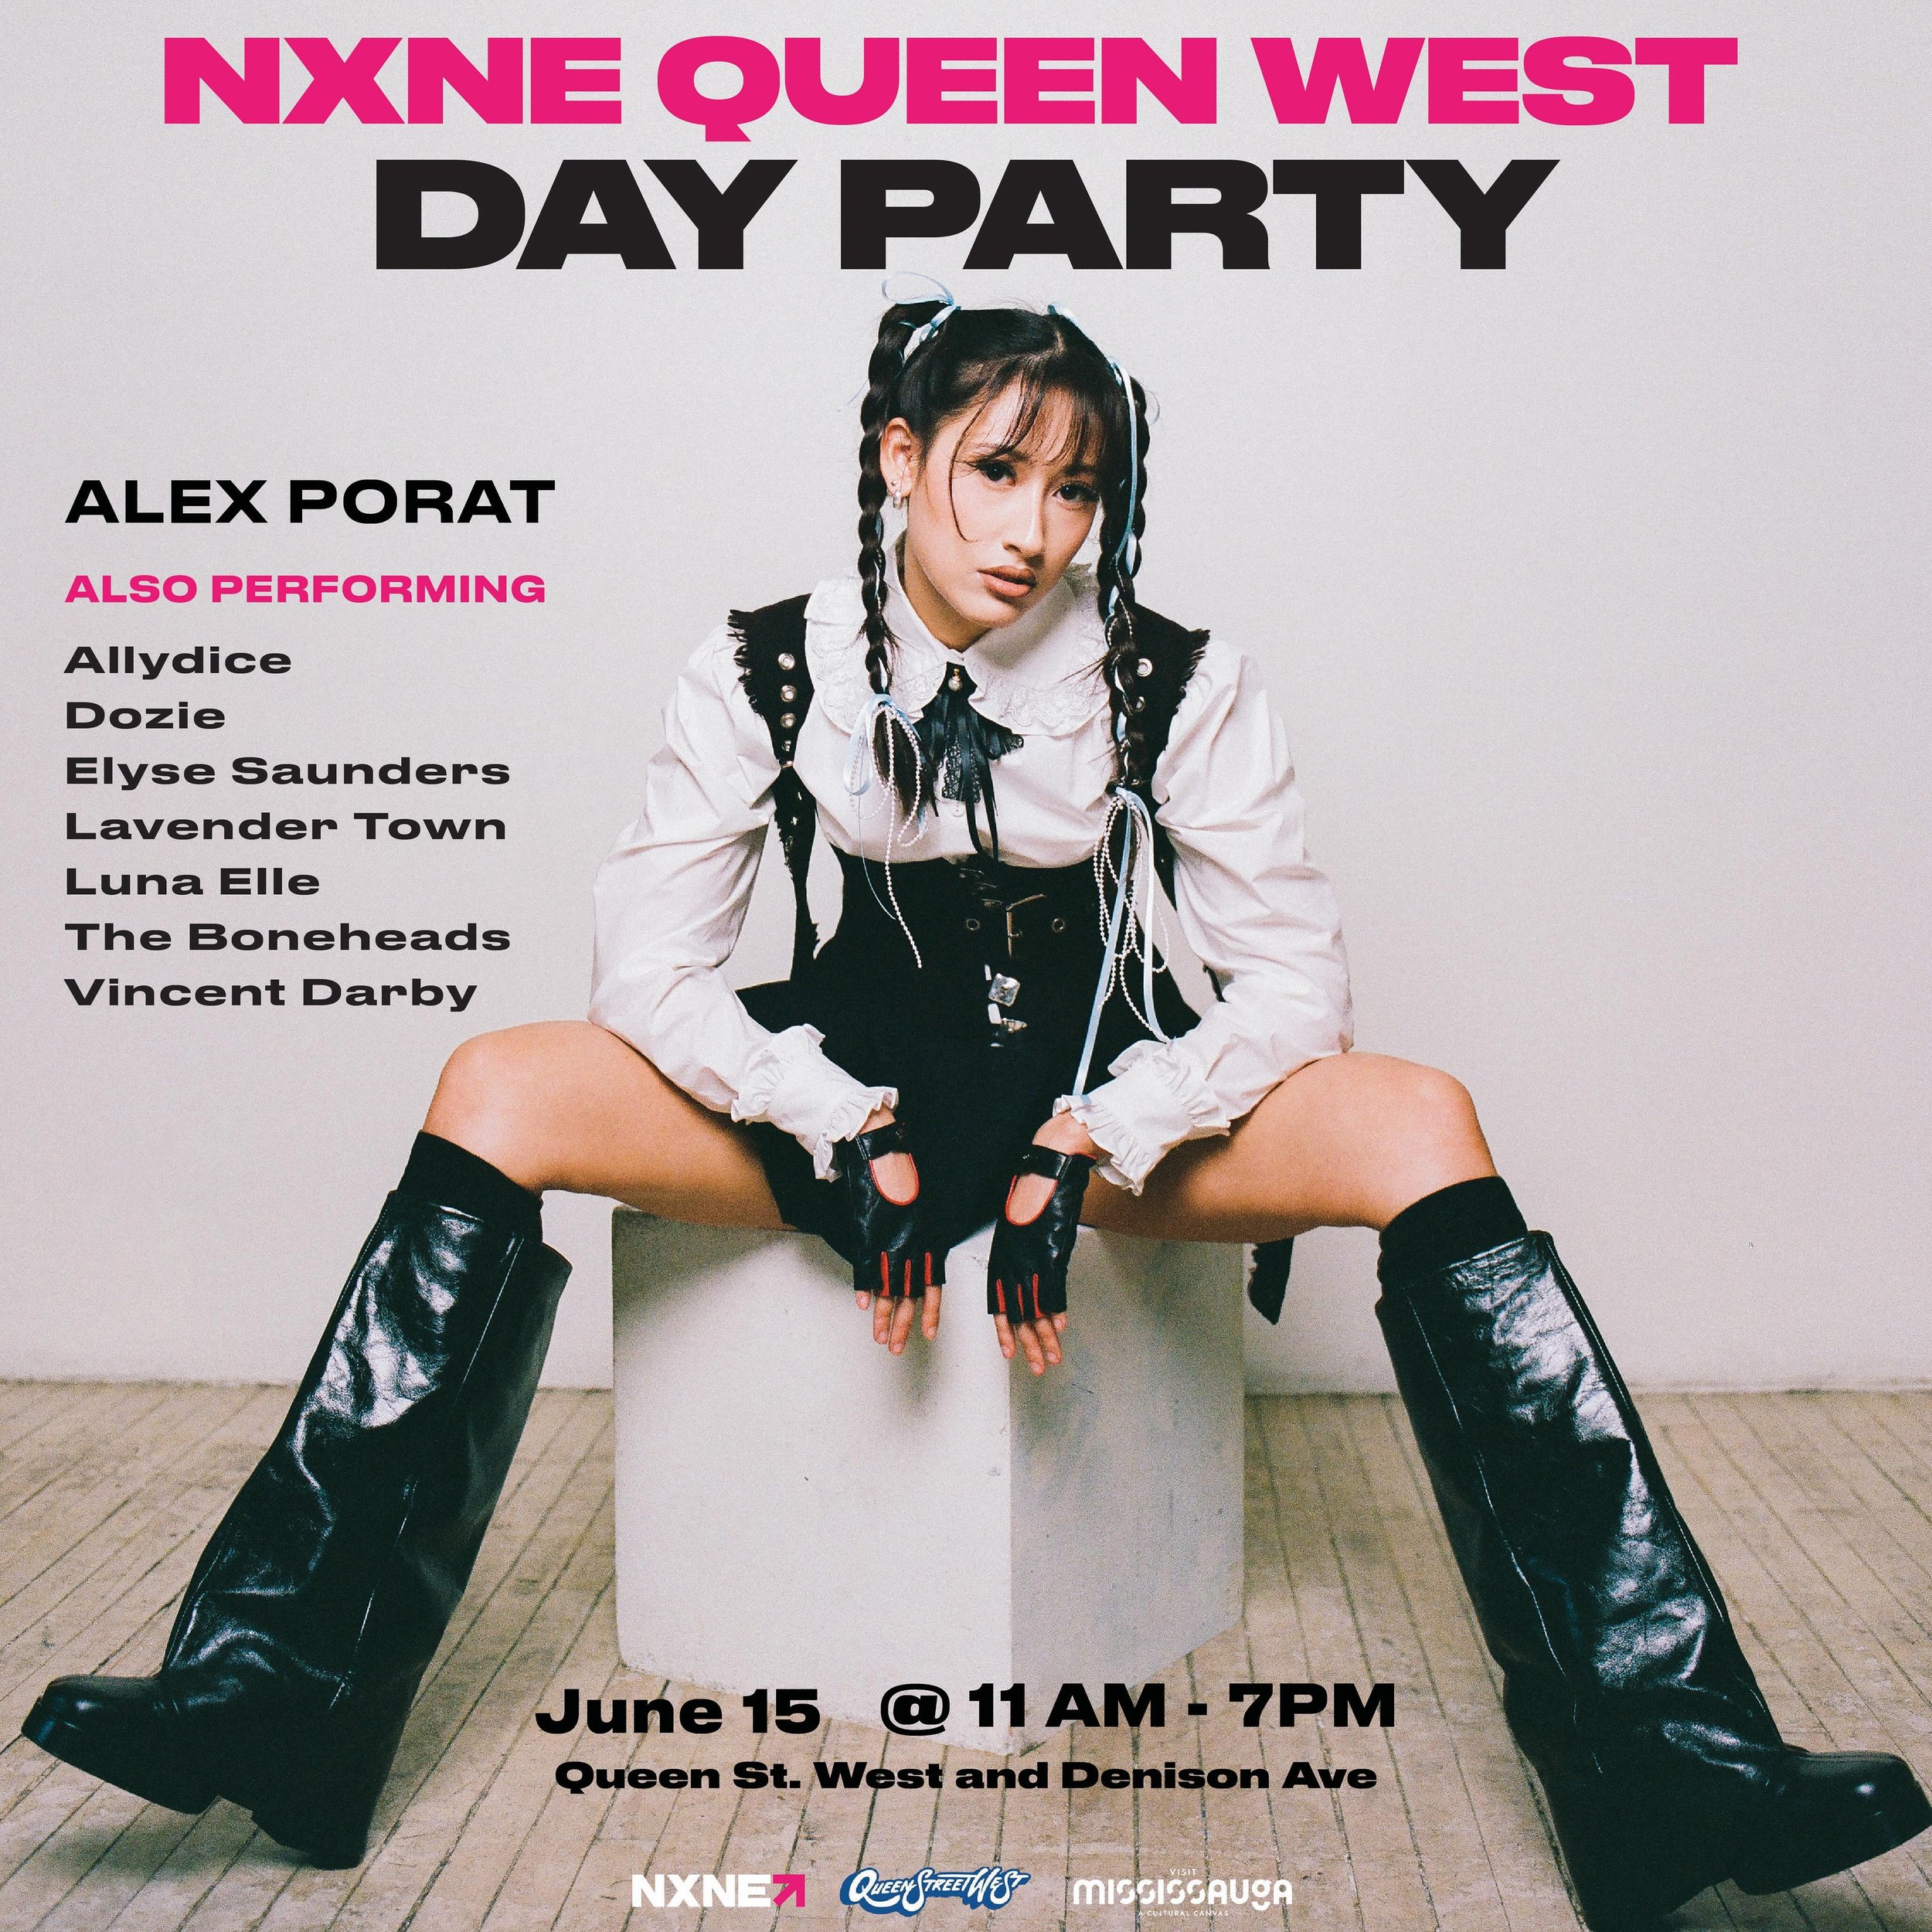 You&rsquo;re Invited to the NXNE Queen West Day Party. ☀️

On June 15 from 11 AM - 7 PM, join NXNE for an all-day outdoor festival celebrating music, art, and the electric community of the Queen West neighbourhood. Featuring performances from headlin